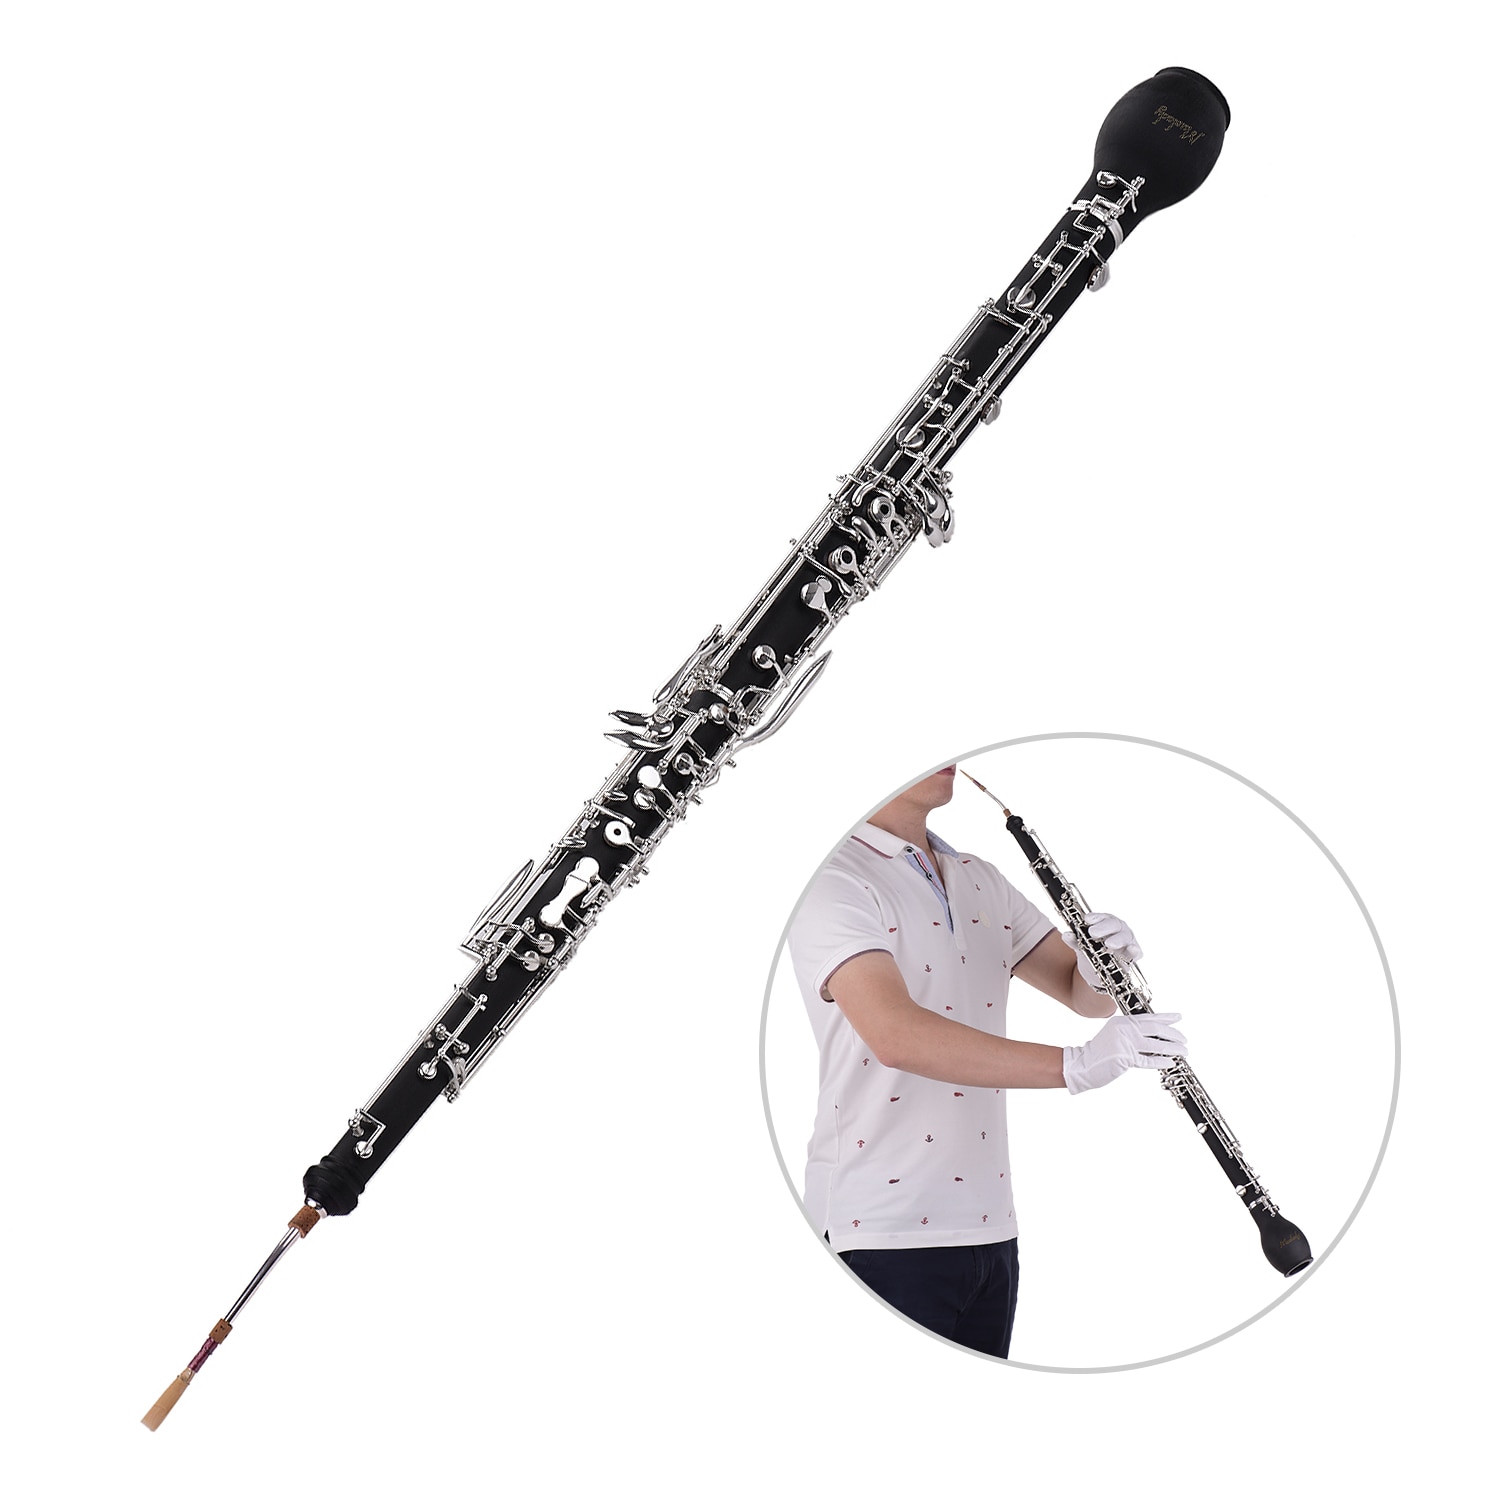 Muslady Professional English Horn Alto Oboe F Key Synthetic Wood Body Silver-plated Keys Woodwind Instrument with Reed Gloves